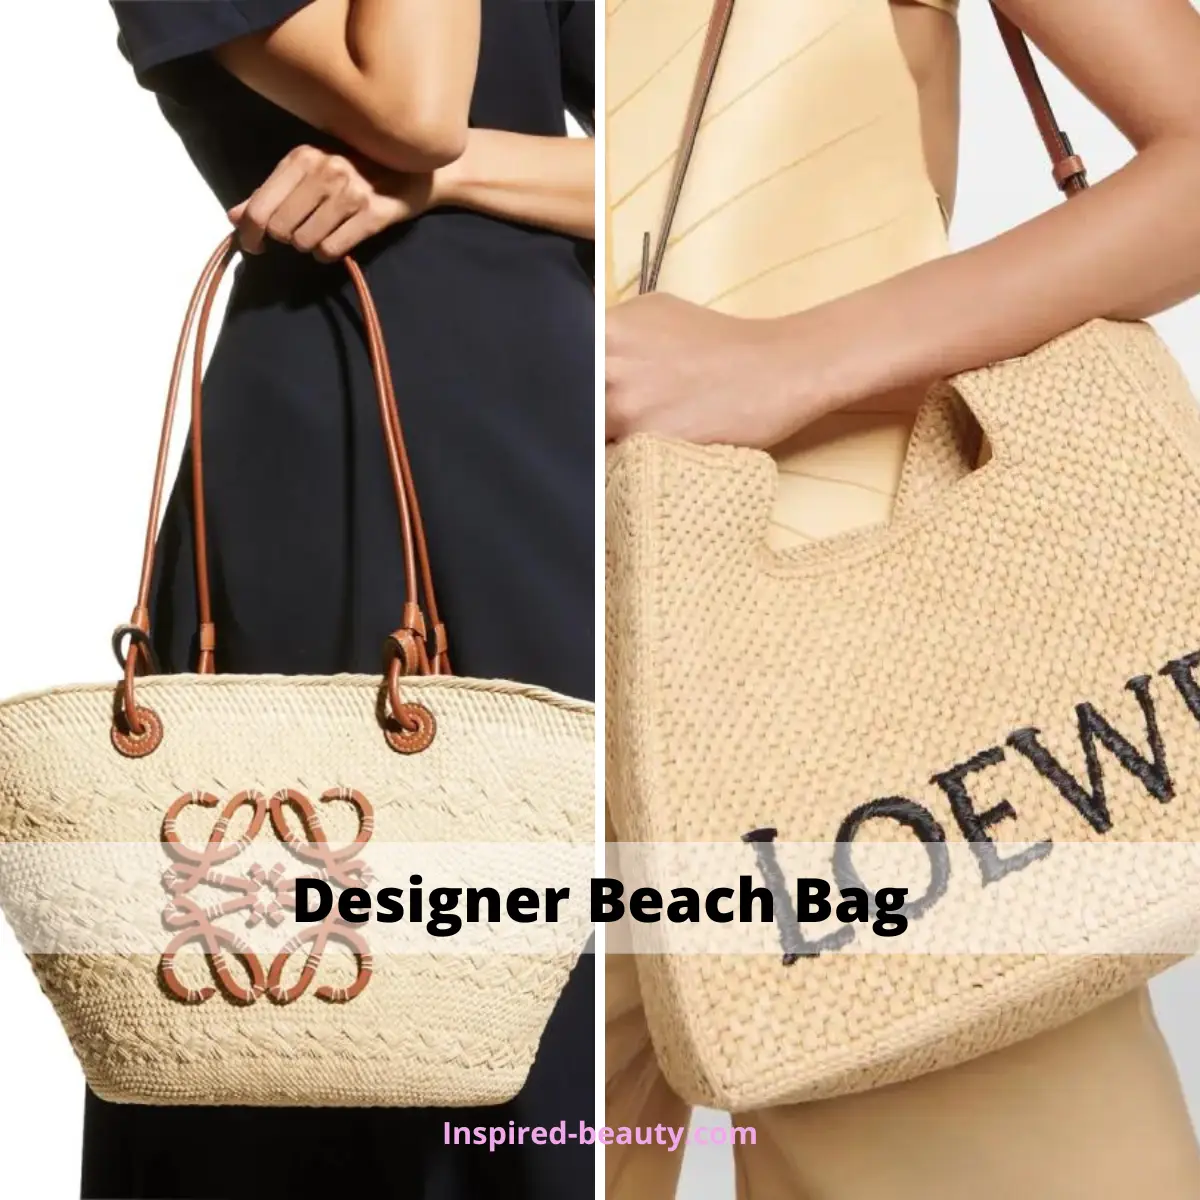 10 Designer Beach Bag Chic Vacation Style Guide - Inspired Beauty